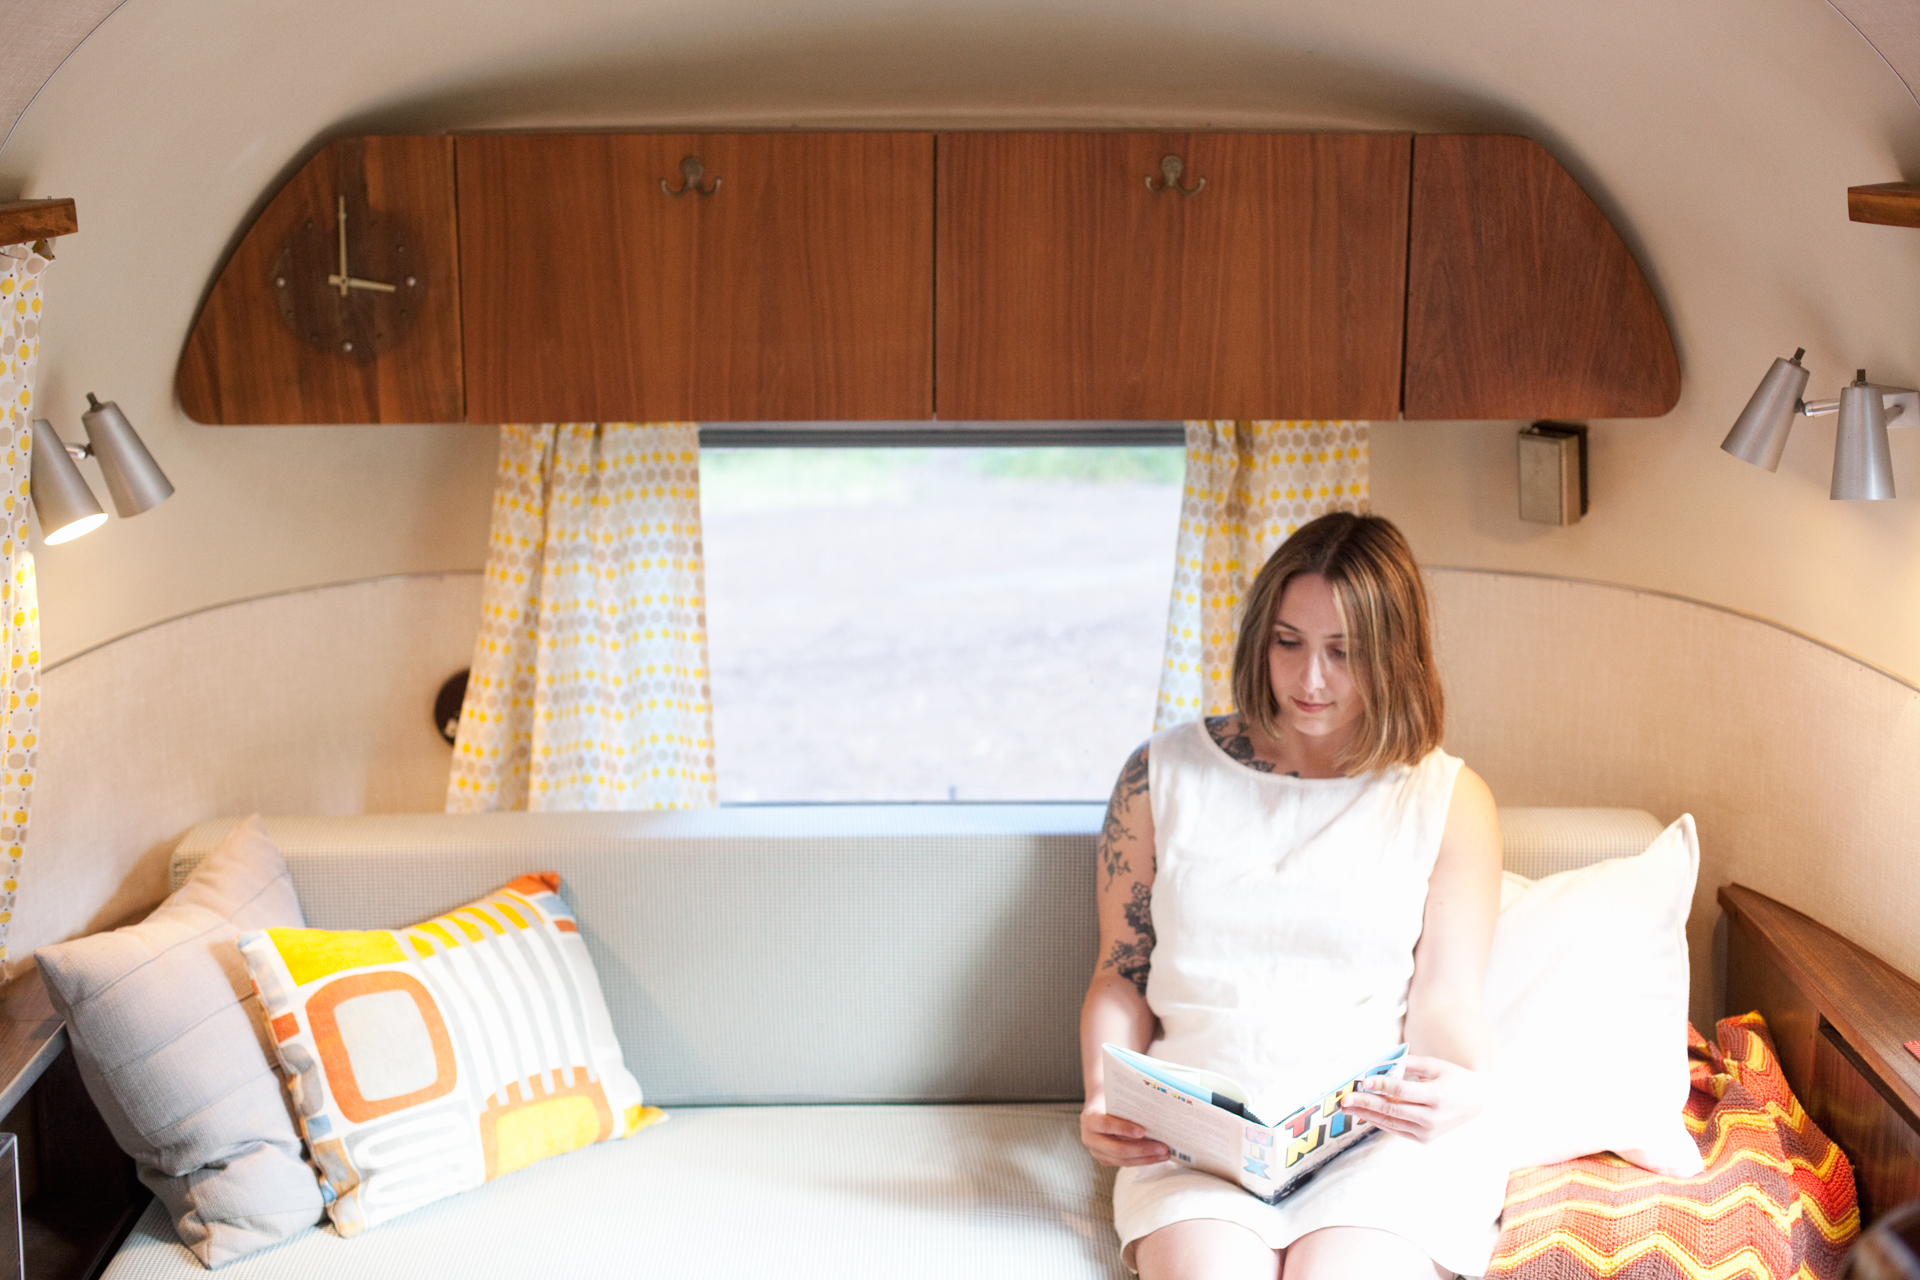 Airstream Glamping in the California Redwoods